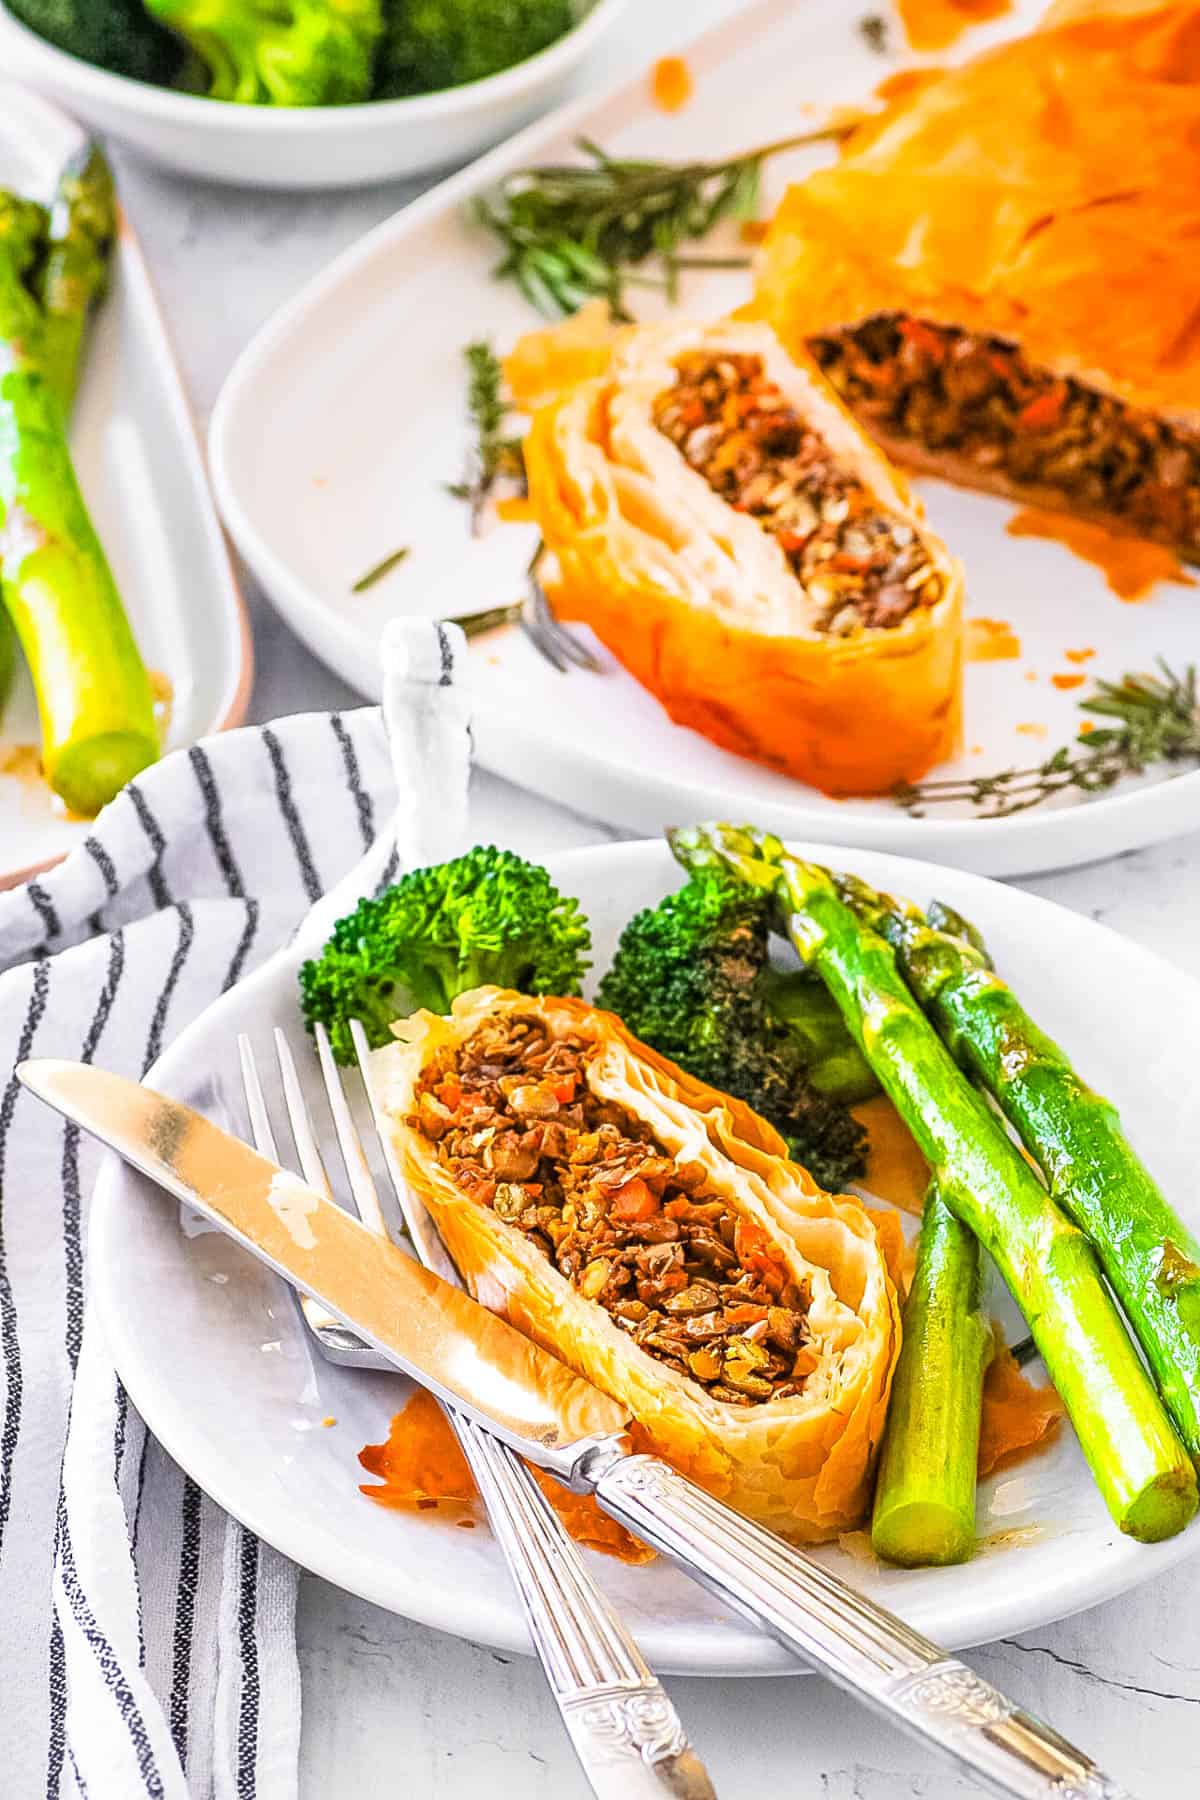 Easy vegan Wellington with lentils and mushrooms, served on a white plate with roasted veggies on the side.